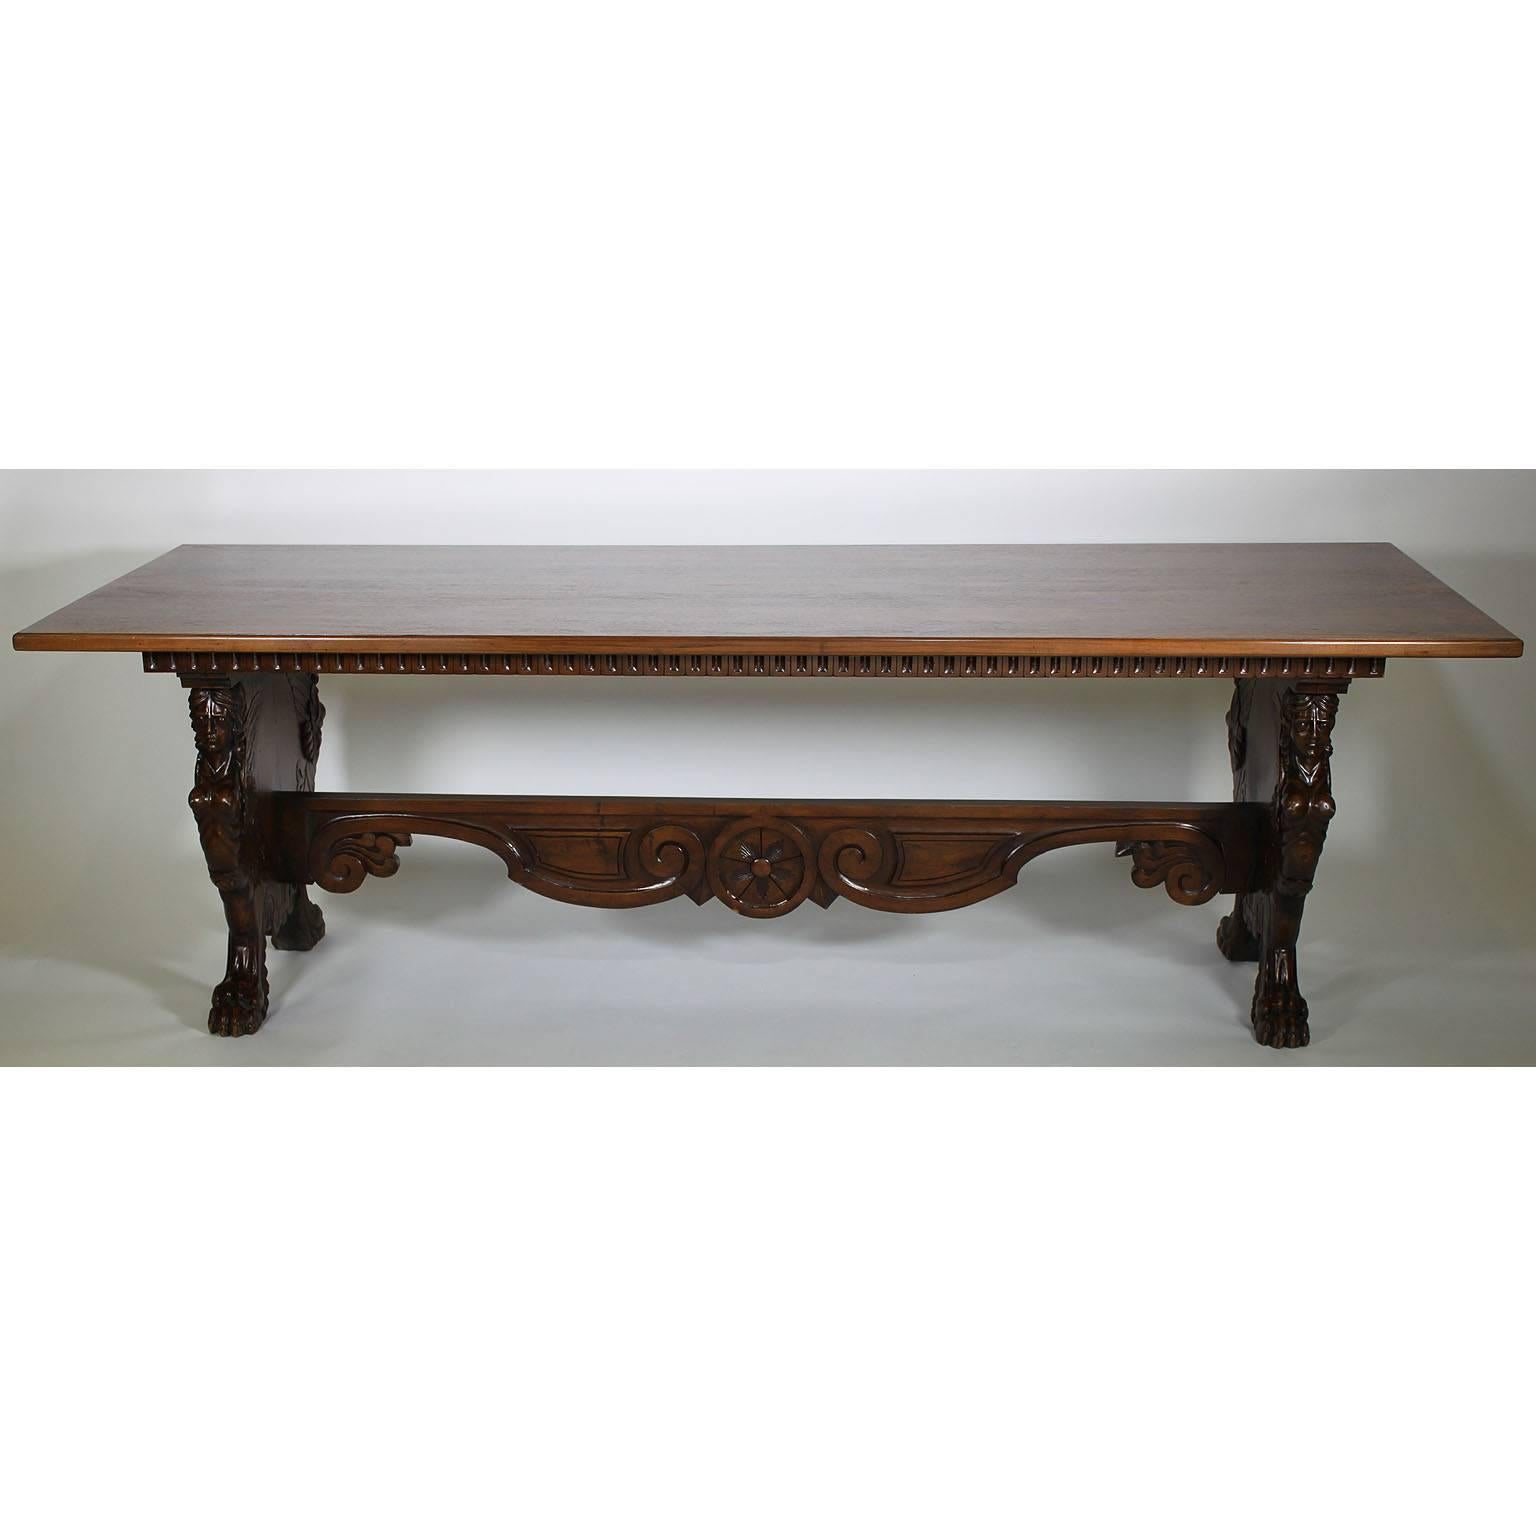 A fine and Large Italian 19th-20th century Baroque style carved walnut tavern table or dining table. The long rectangular top (later) atop a pair of carved bases with figures of winged maiden, shells, scrolls and centred with a roaring lion head.